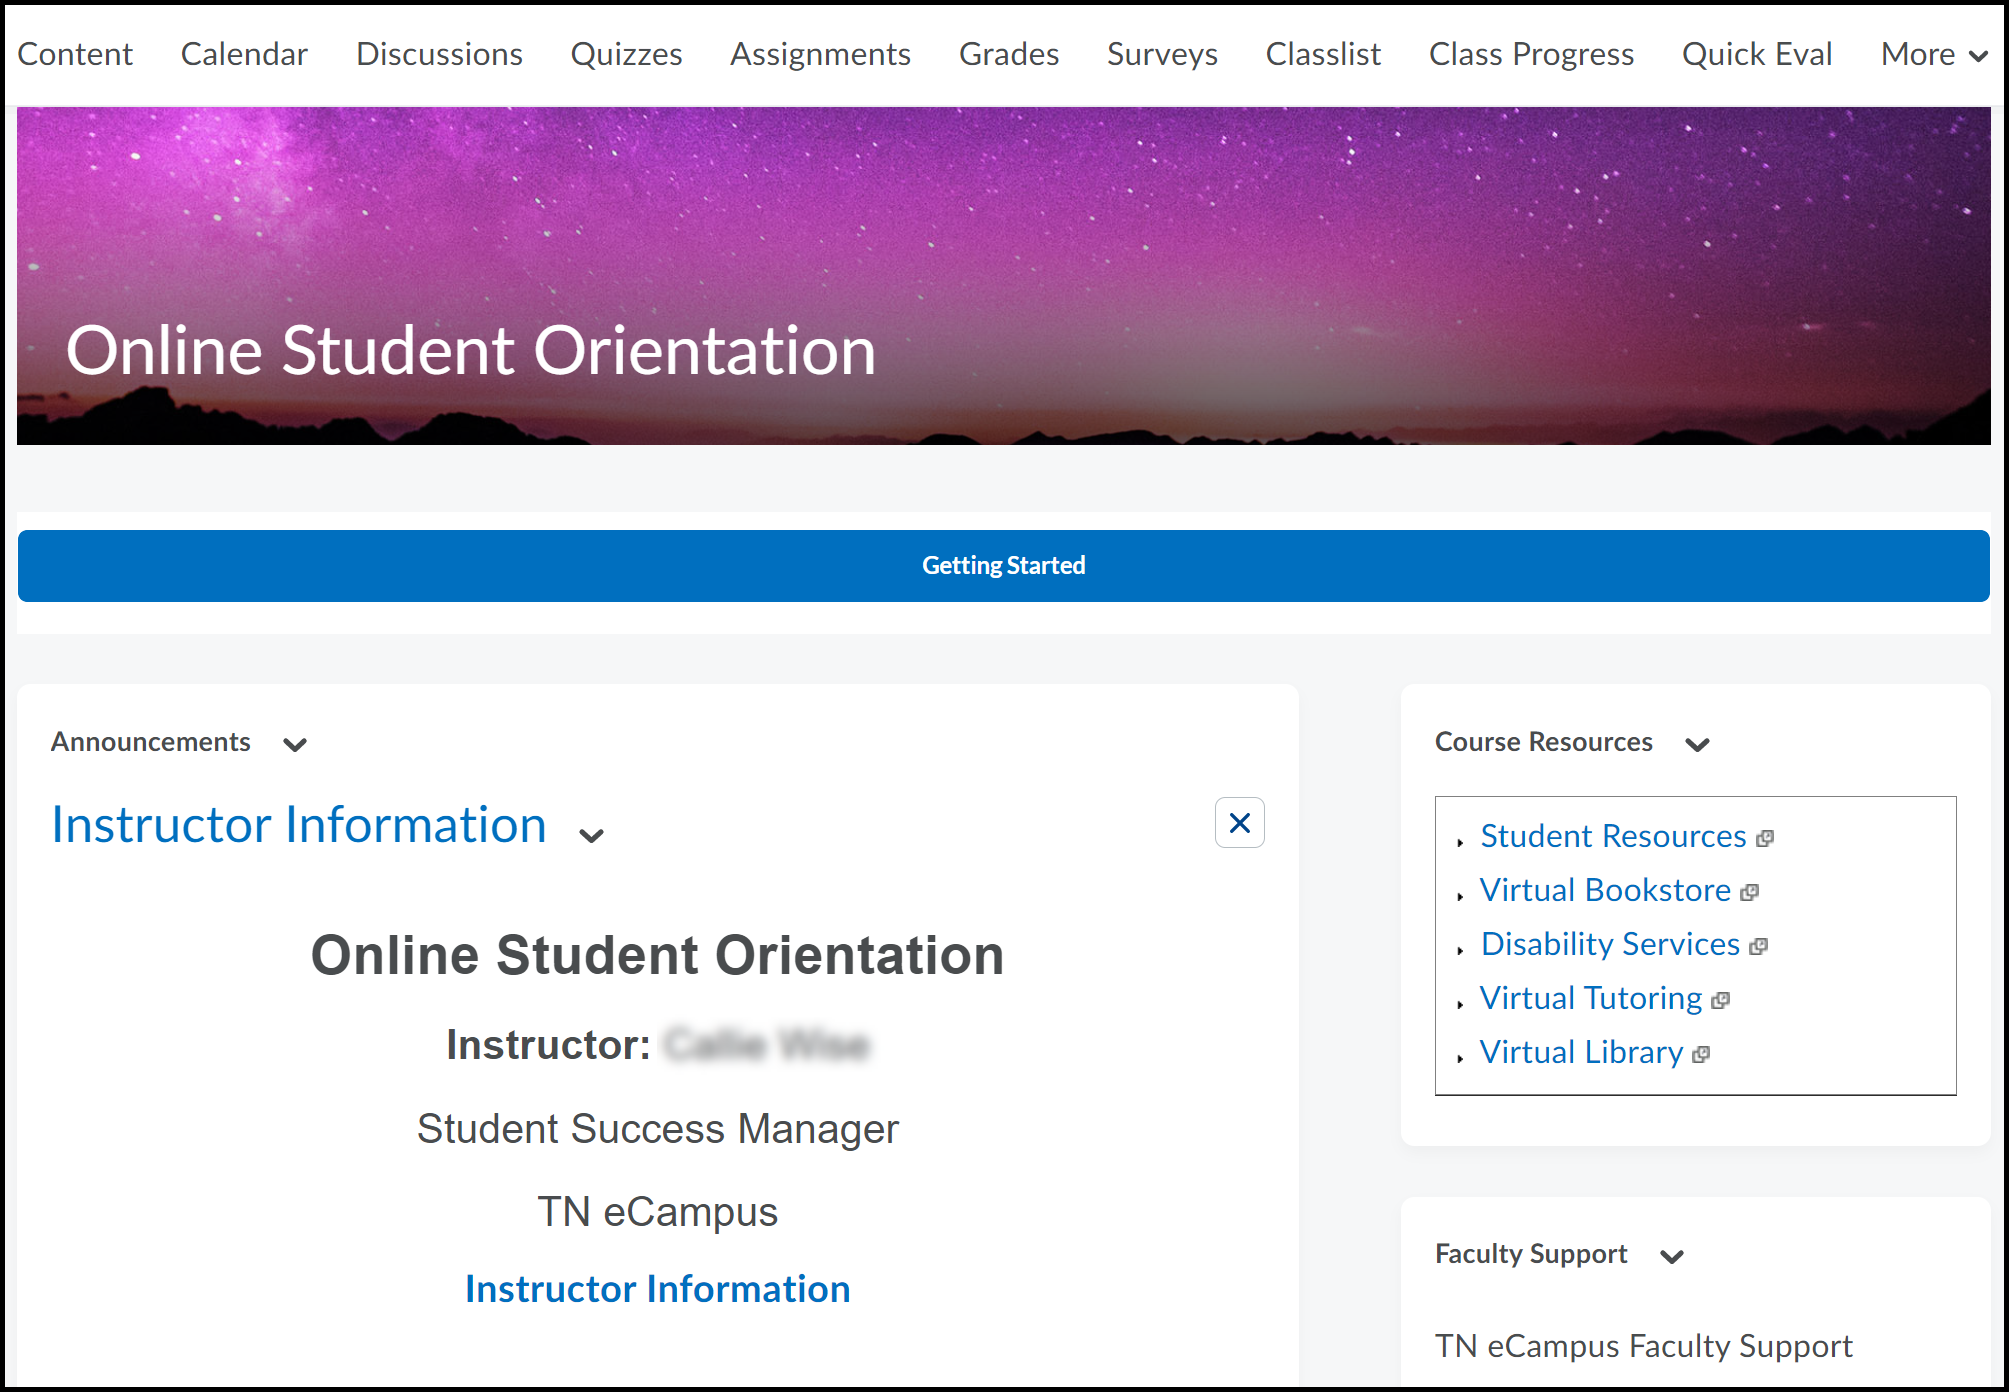 Instructor information link highlighted from homepage under Announcements.